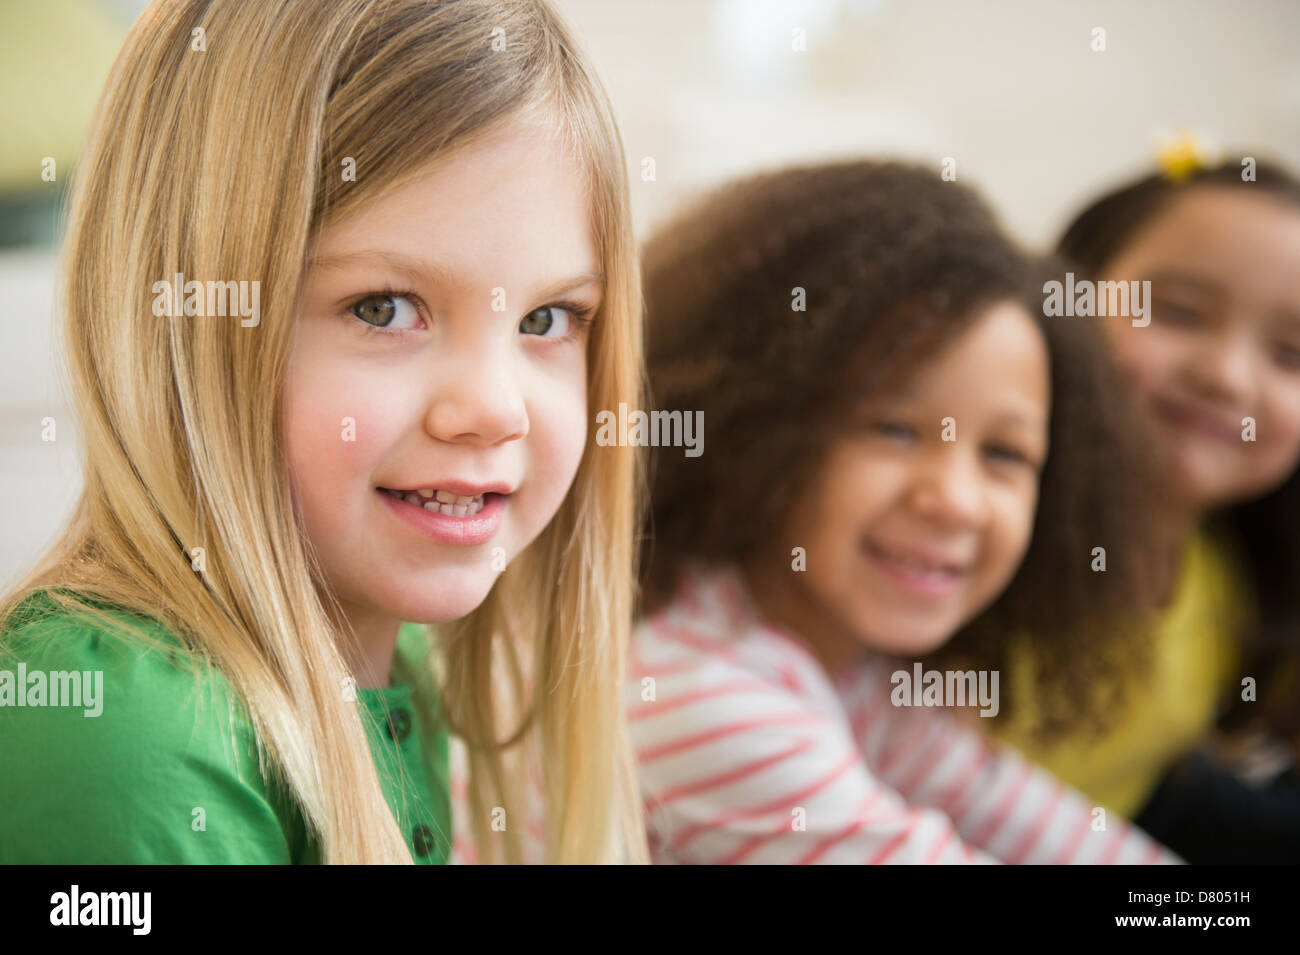 Smiling girls sitting in line Banque D'Images